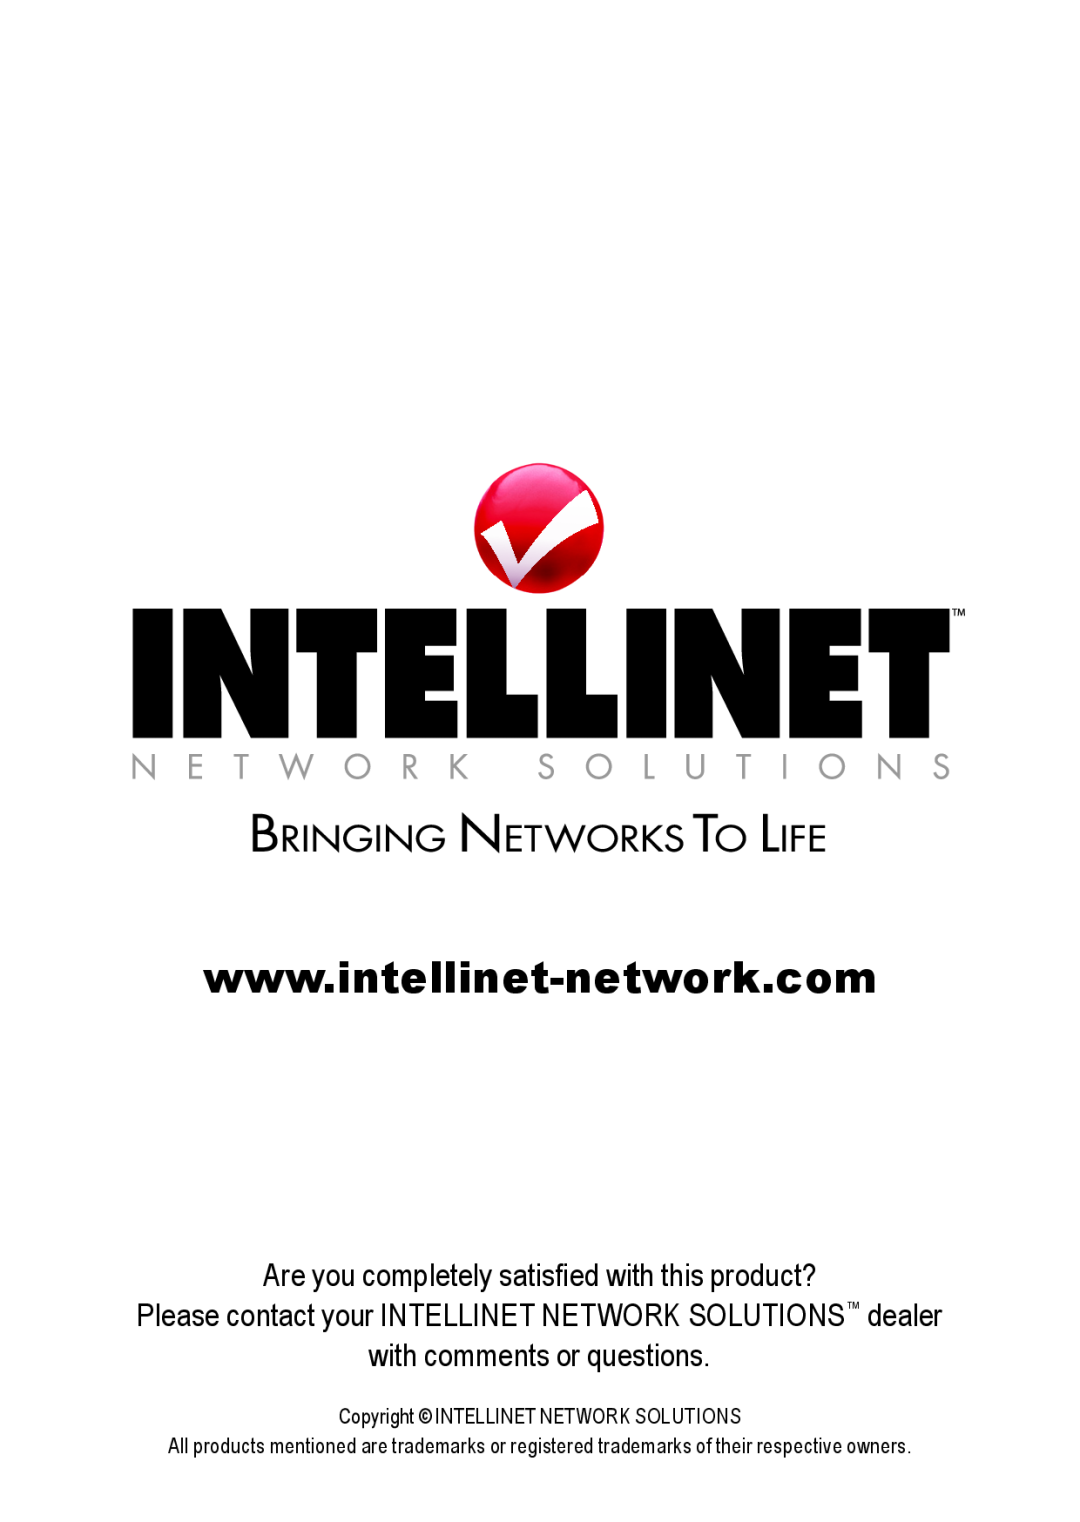 Intellinet Network Solutions 503358 user manual Are you completely satisfied with this product?, with comments or questions 